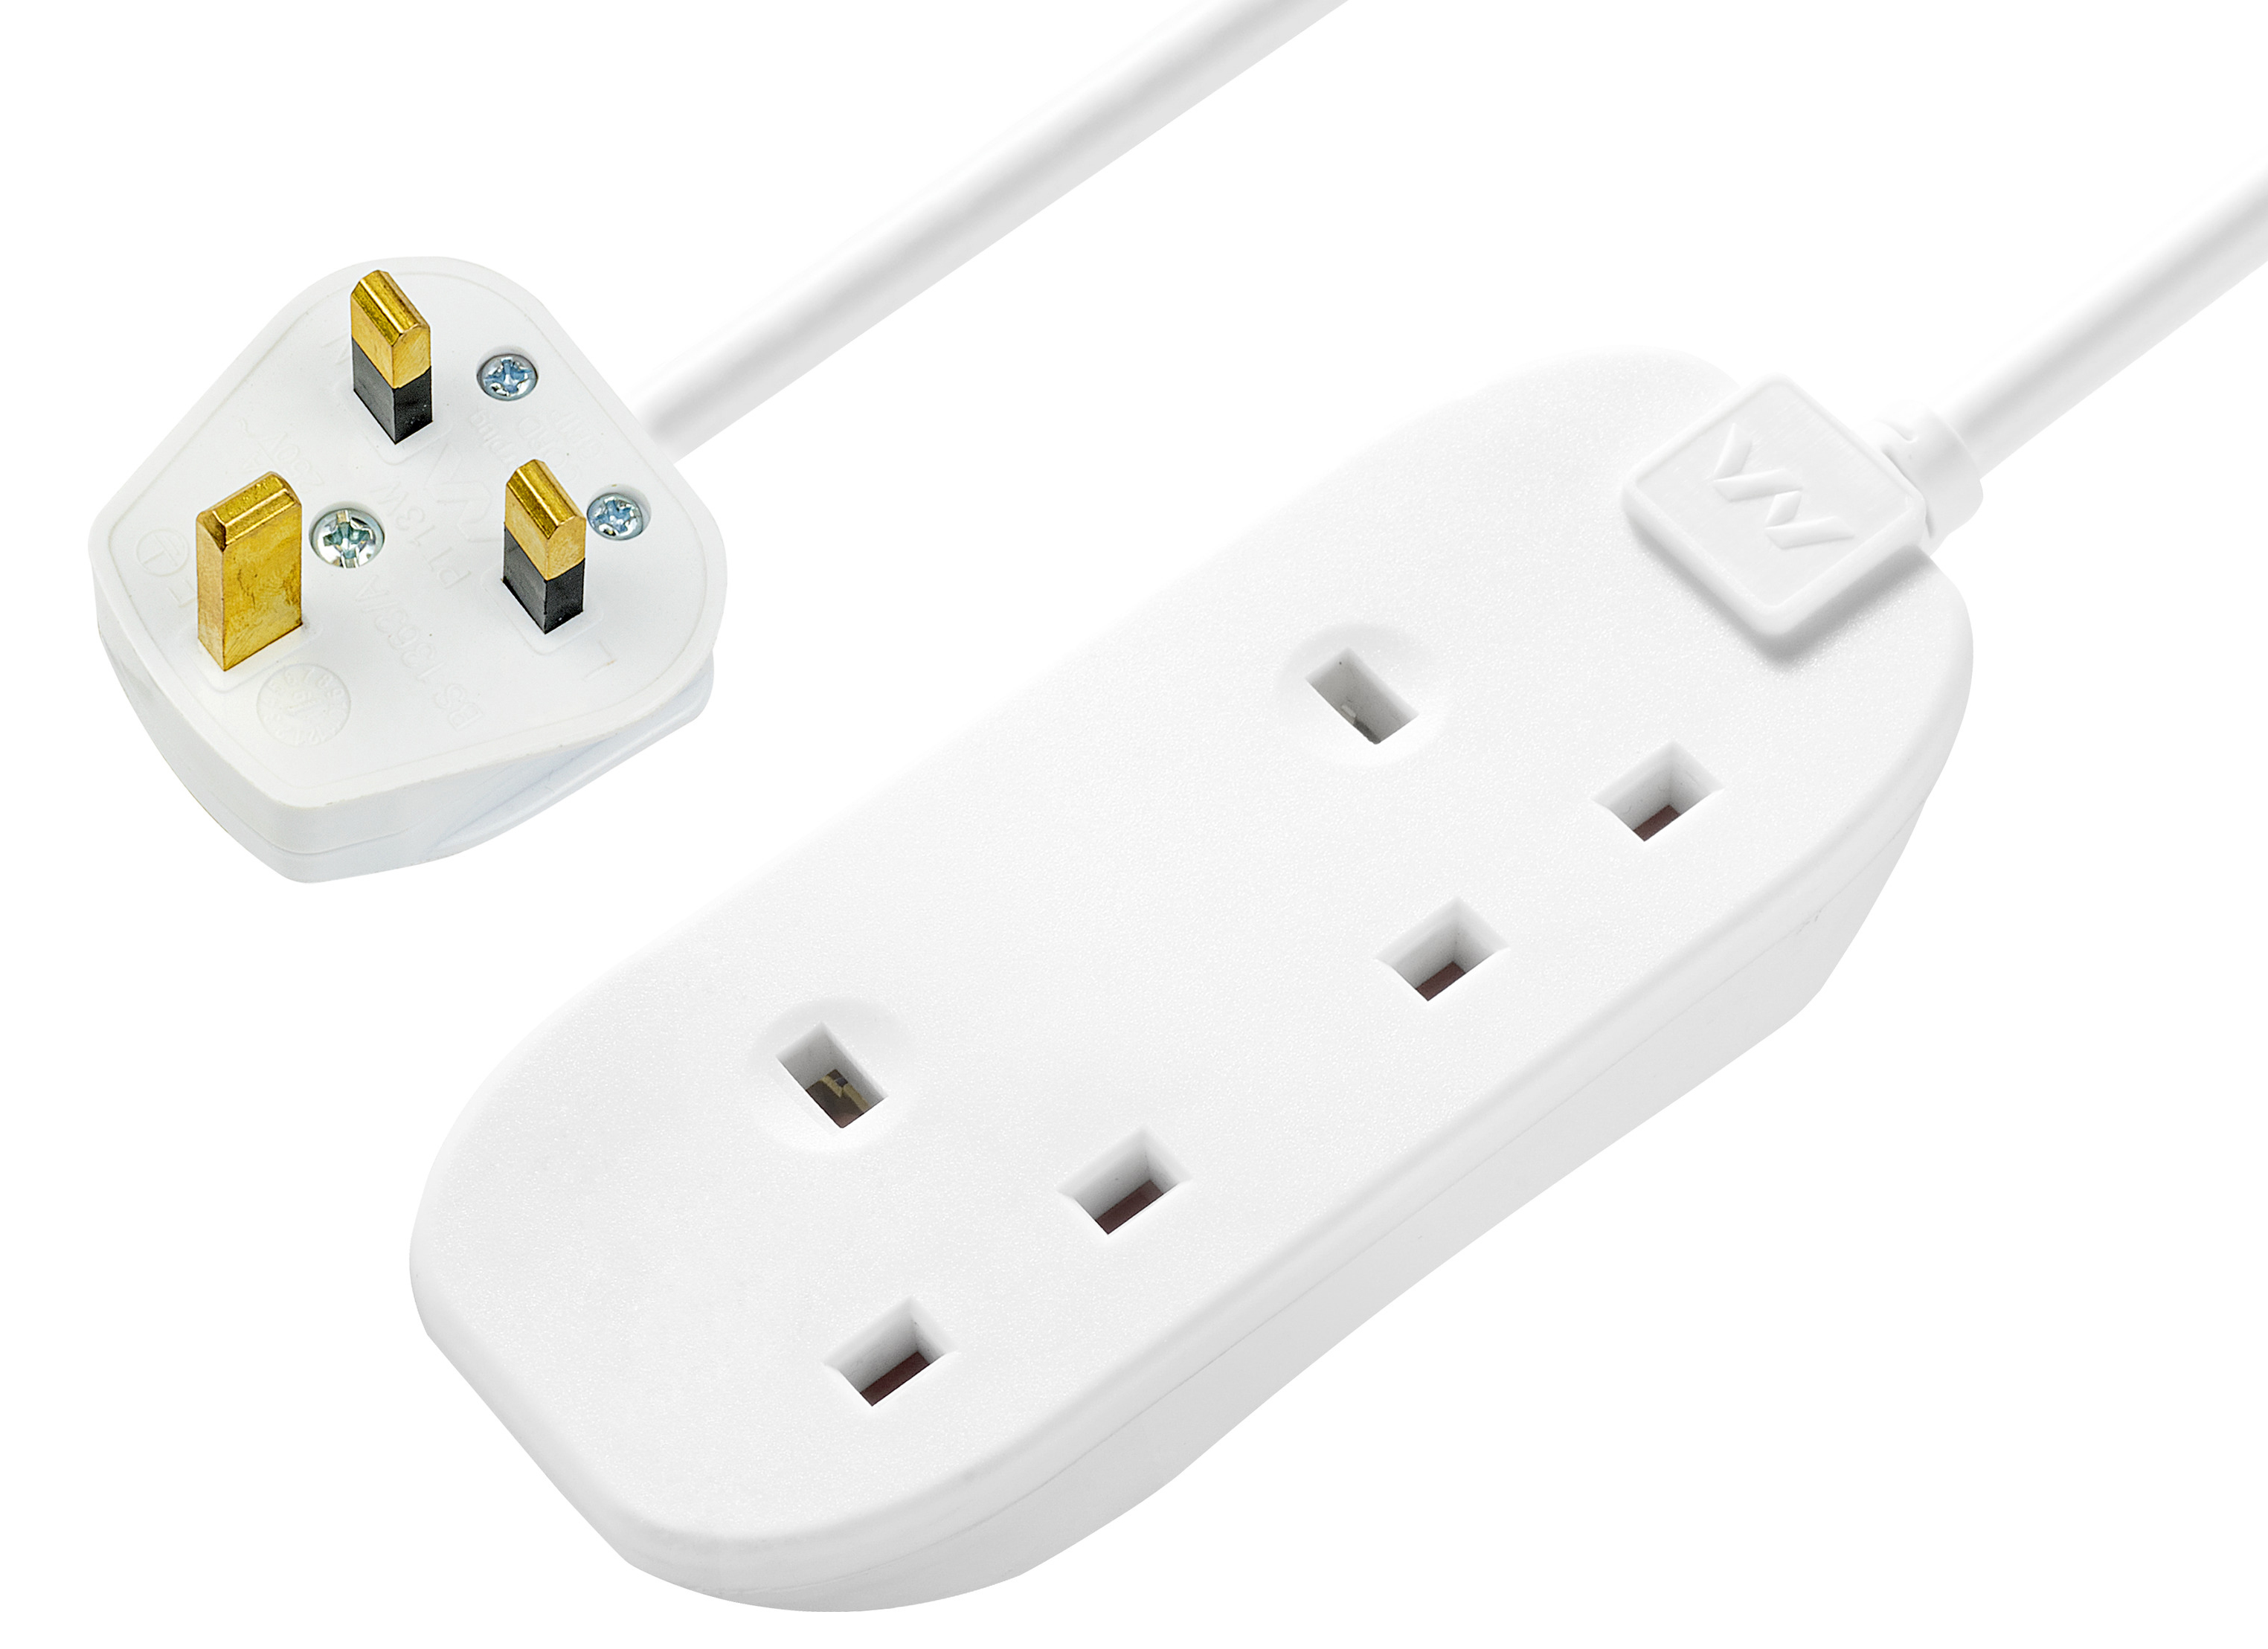 Image of Masterplug 2 Socket Extension Lead - White 5m 13A